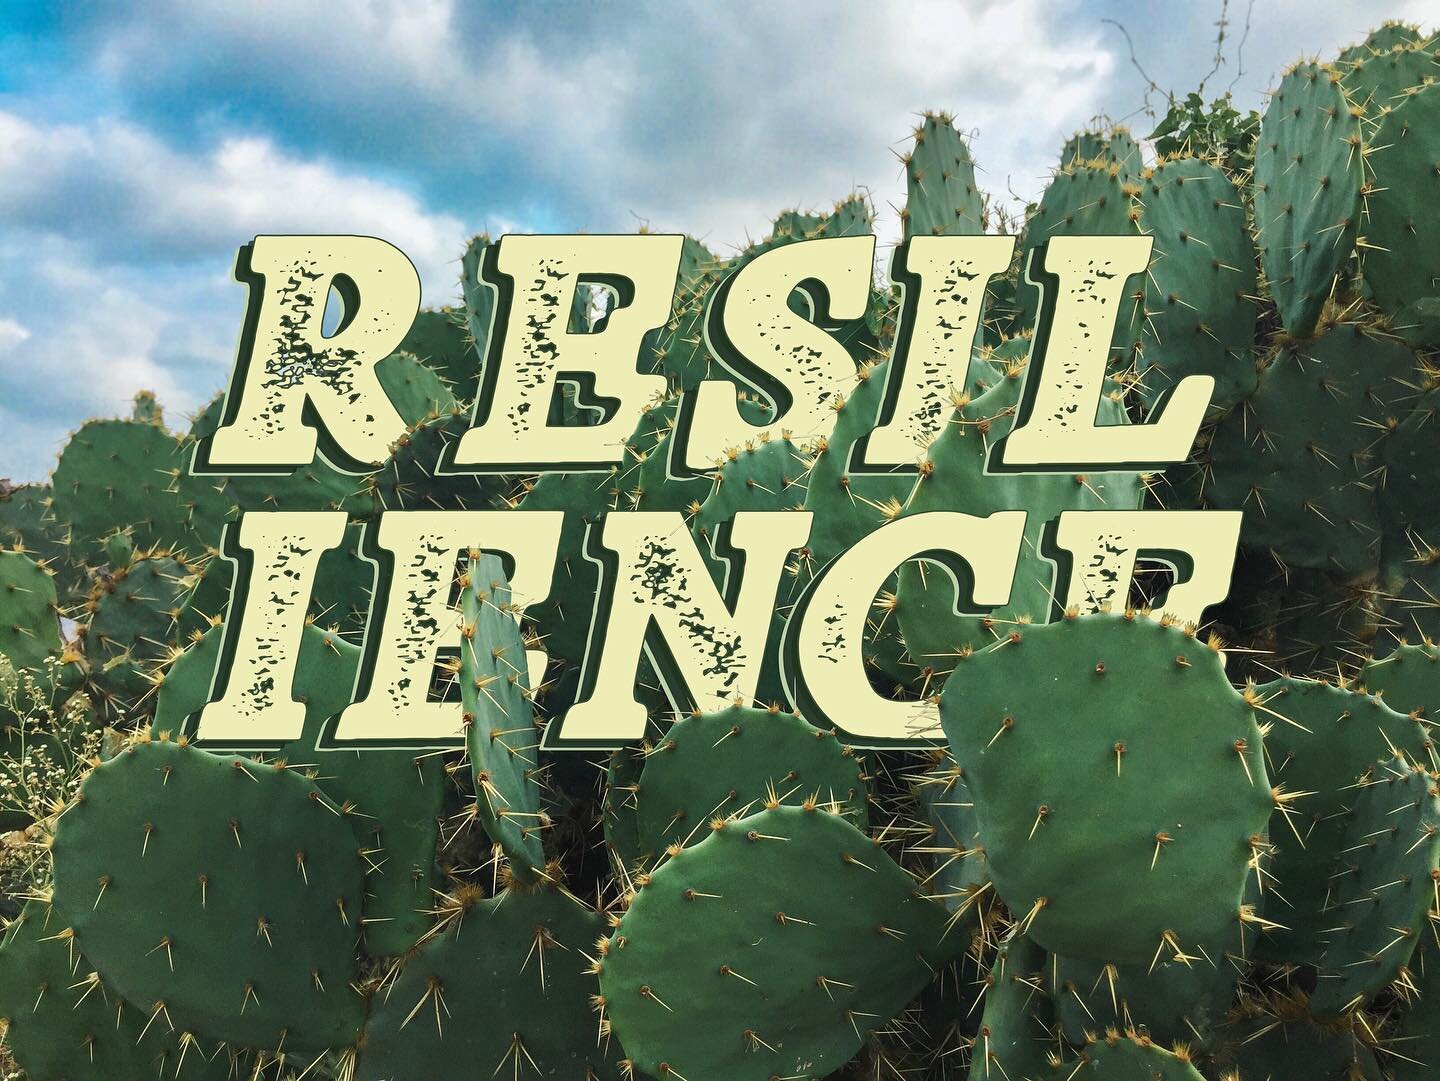 RESILIENCE!🌵✊🏽✊🏾✊🏿
We are strong and together we can overcome any obstacle that is placed in our path!! 
.
.
.
.
.
.
.
.
.
.
#art #artist #graphic #graphicdesign #graphicdesigner #digital #digitalillustration #digitalart #chicanx #latinx #chicana